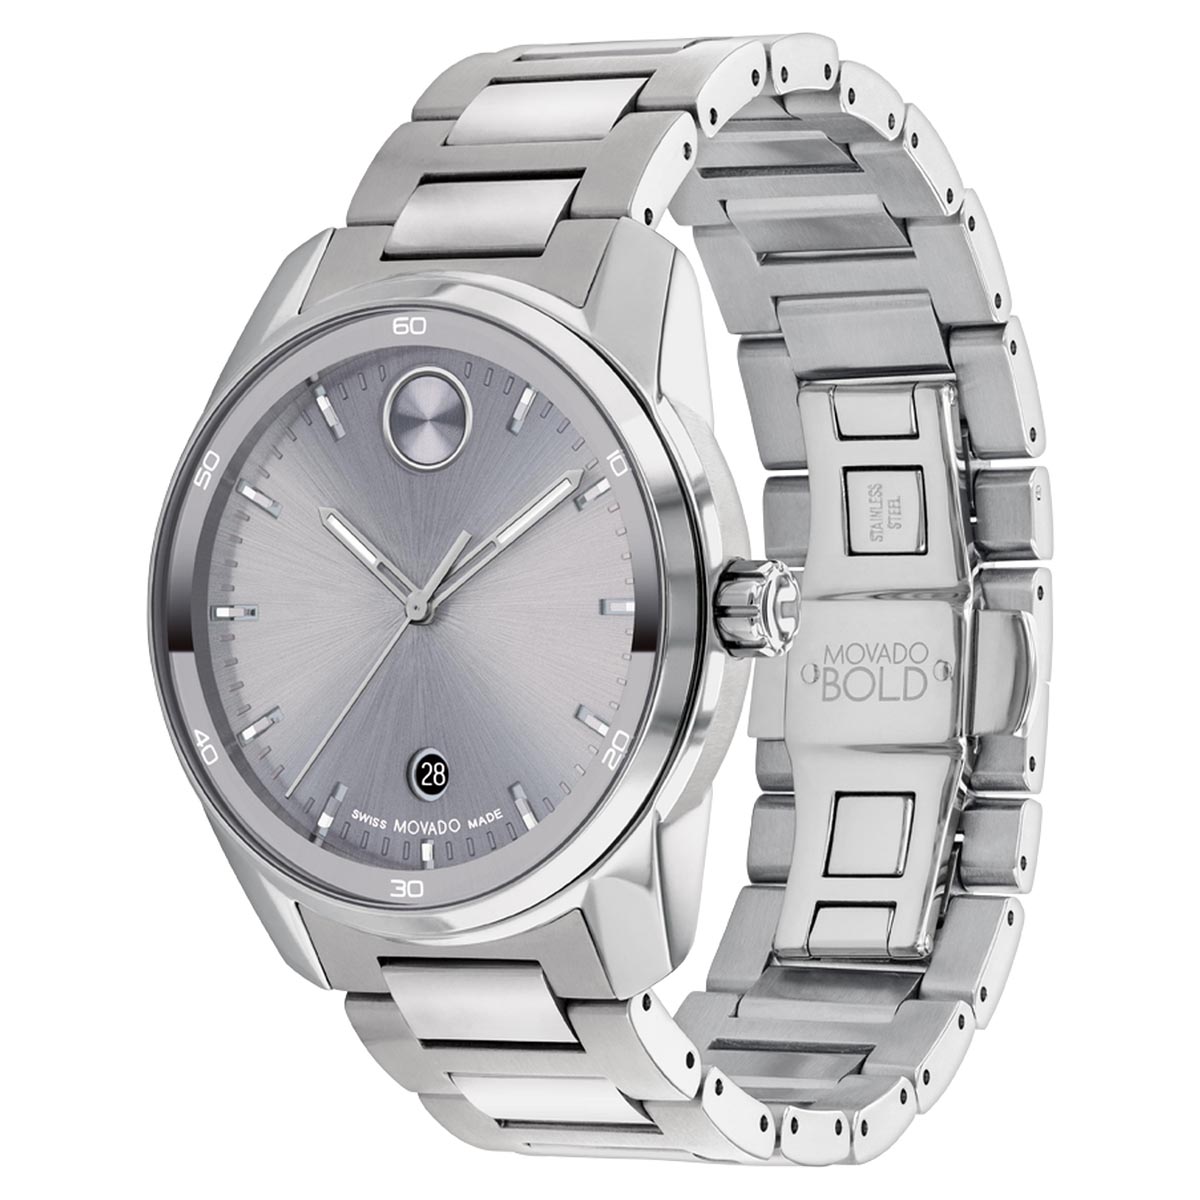 Movado Bold Verso Men's Watch with Gray Dial and Stainless Steel Bracelet (quartz movement)